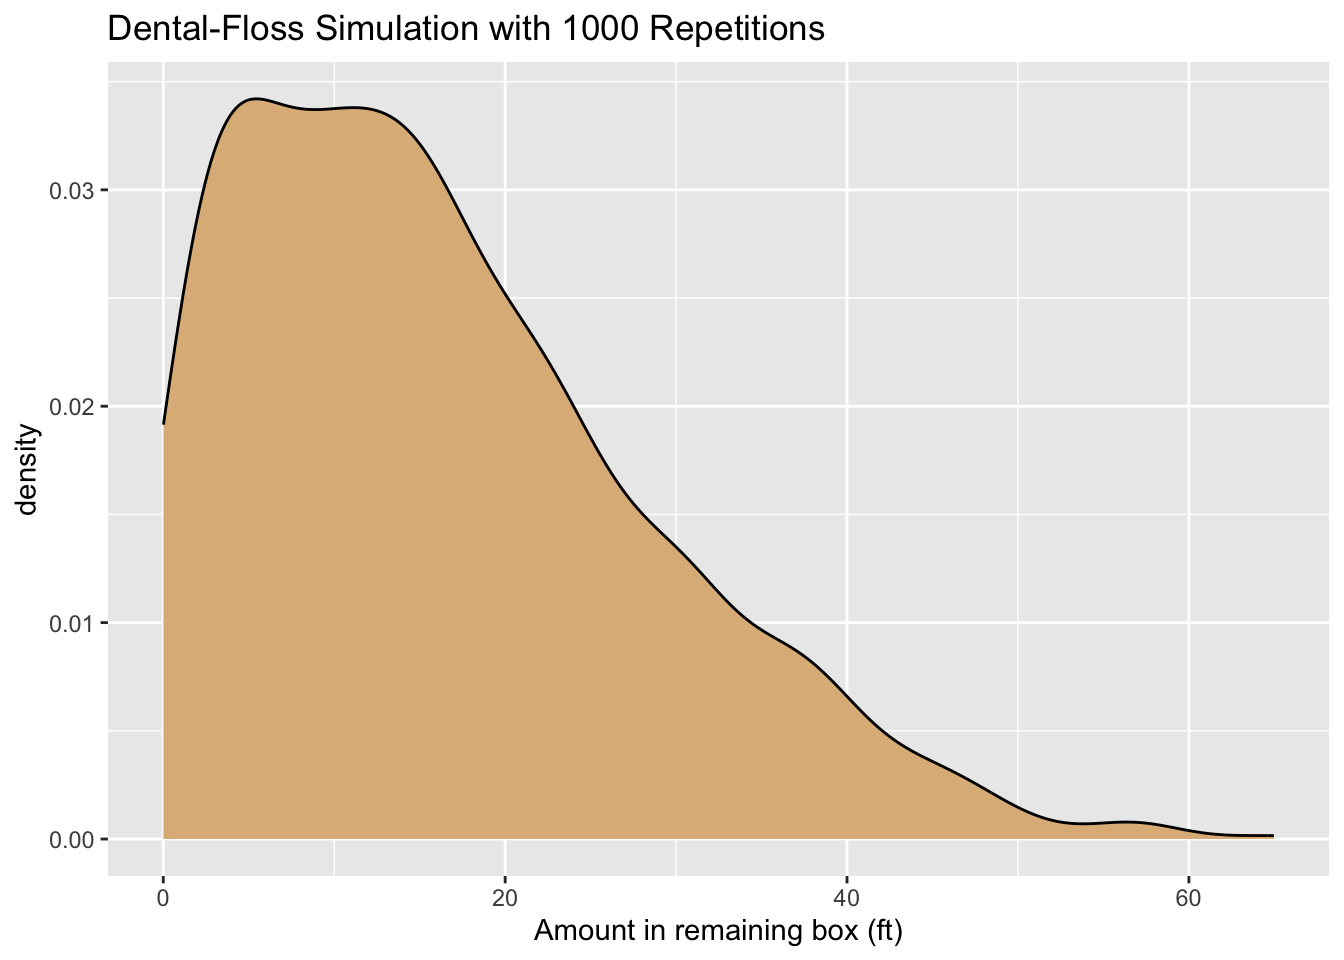 Density plot of the results of a dental-floss simulation.